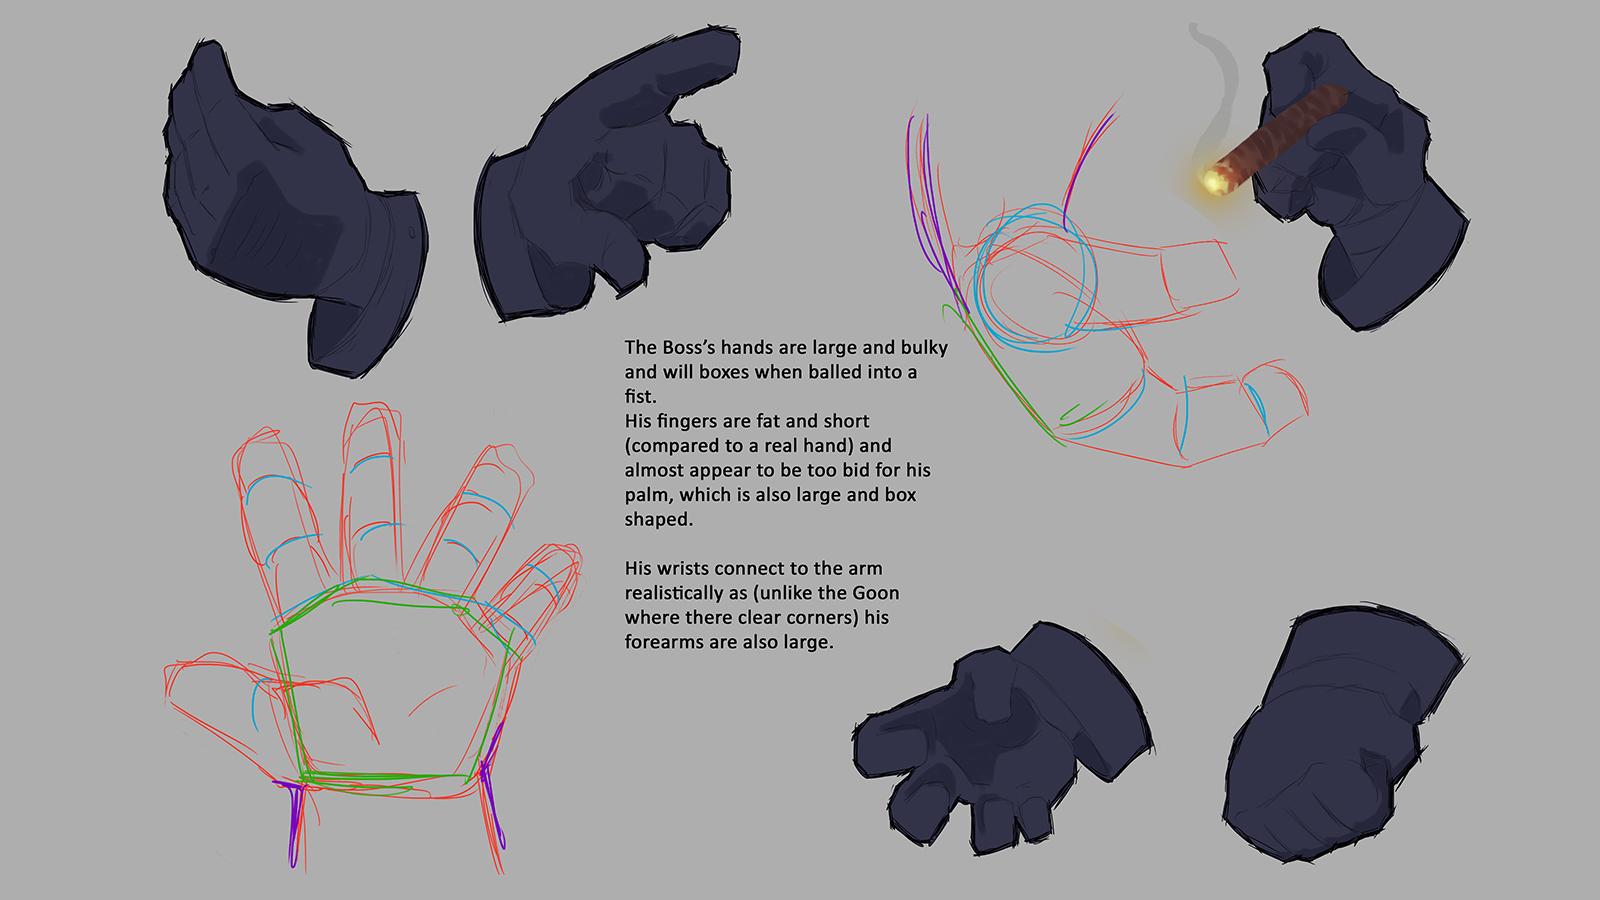 A description of how the boss's hands get drawn from multiple angles.